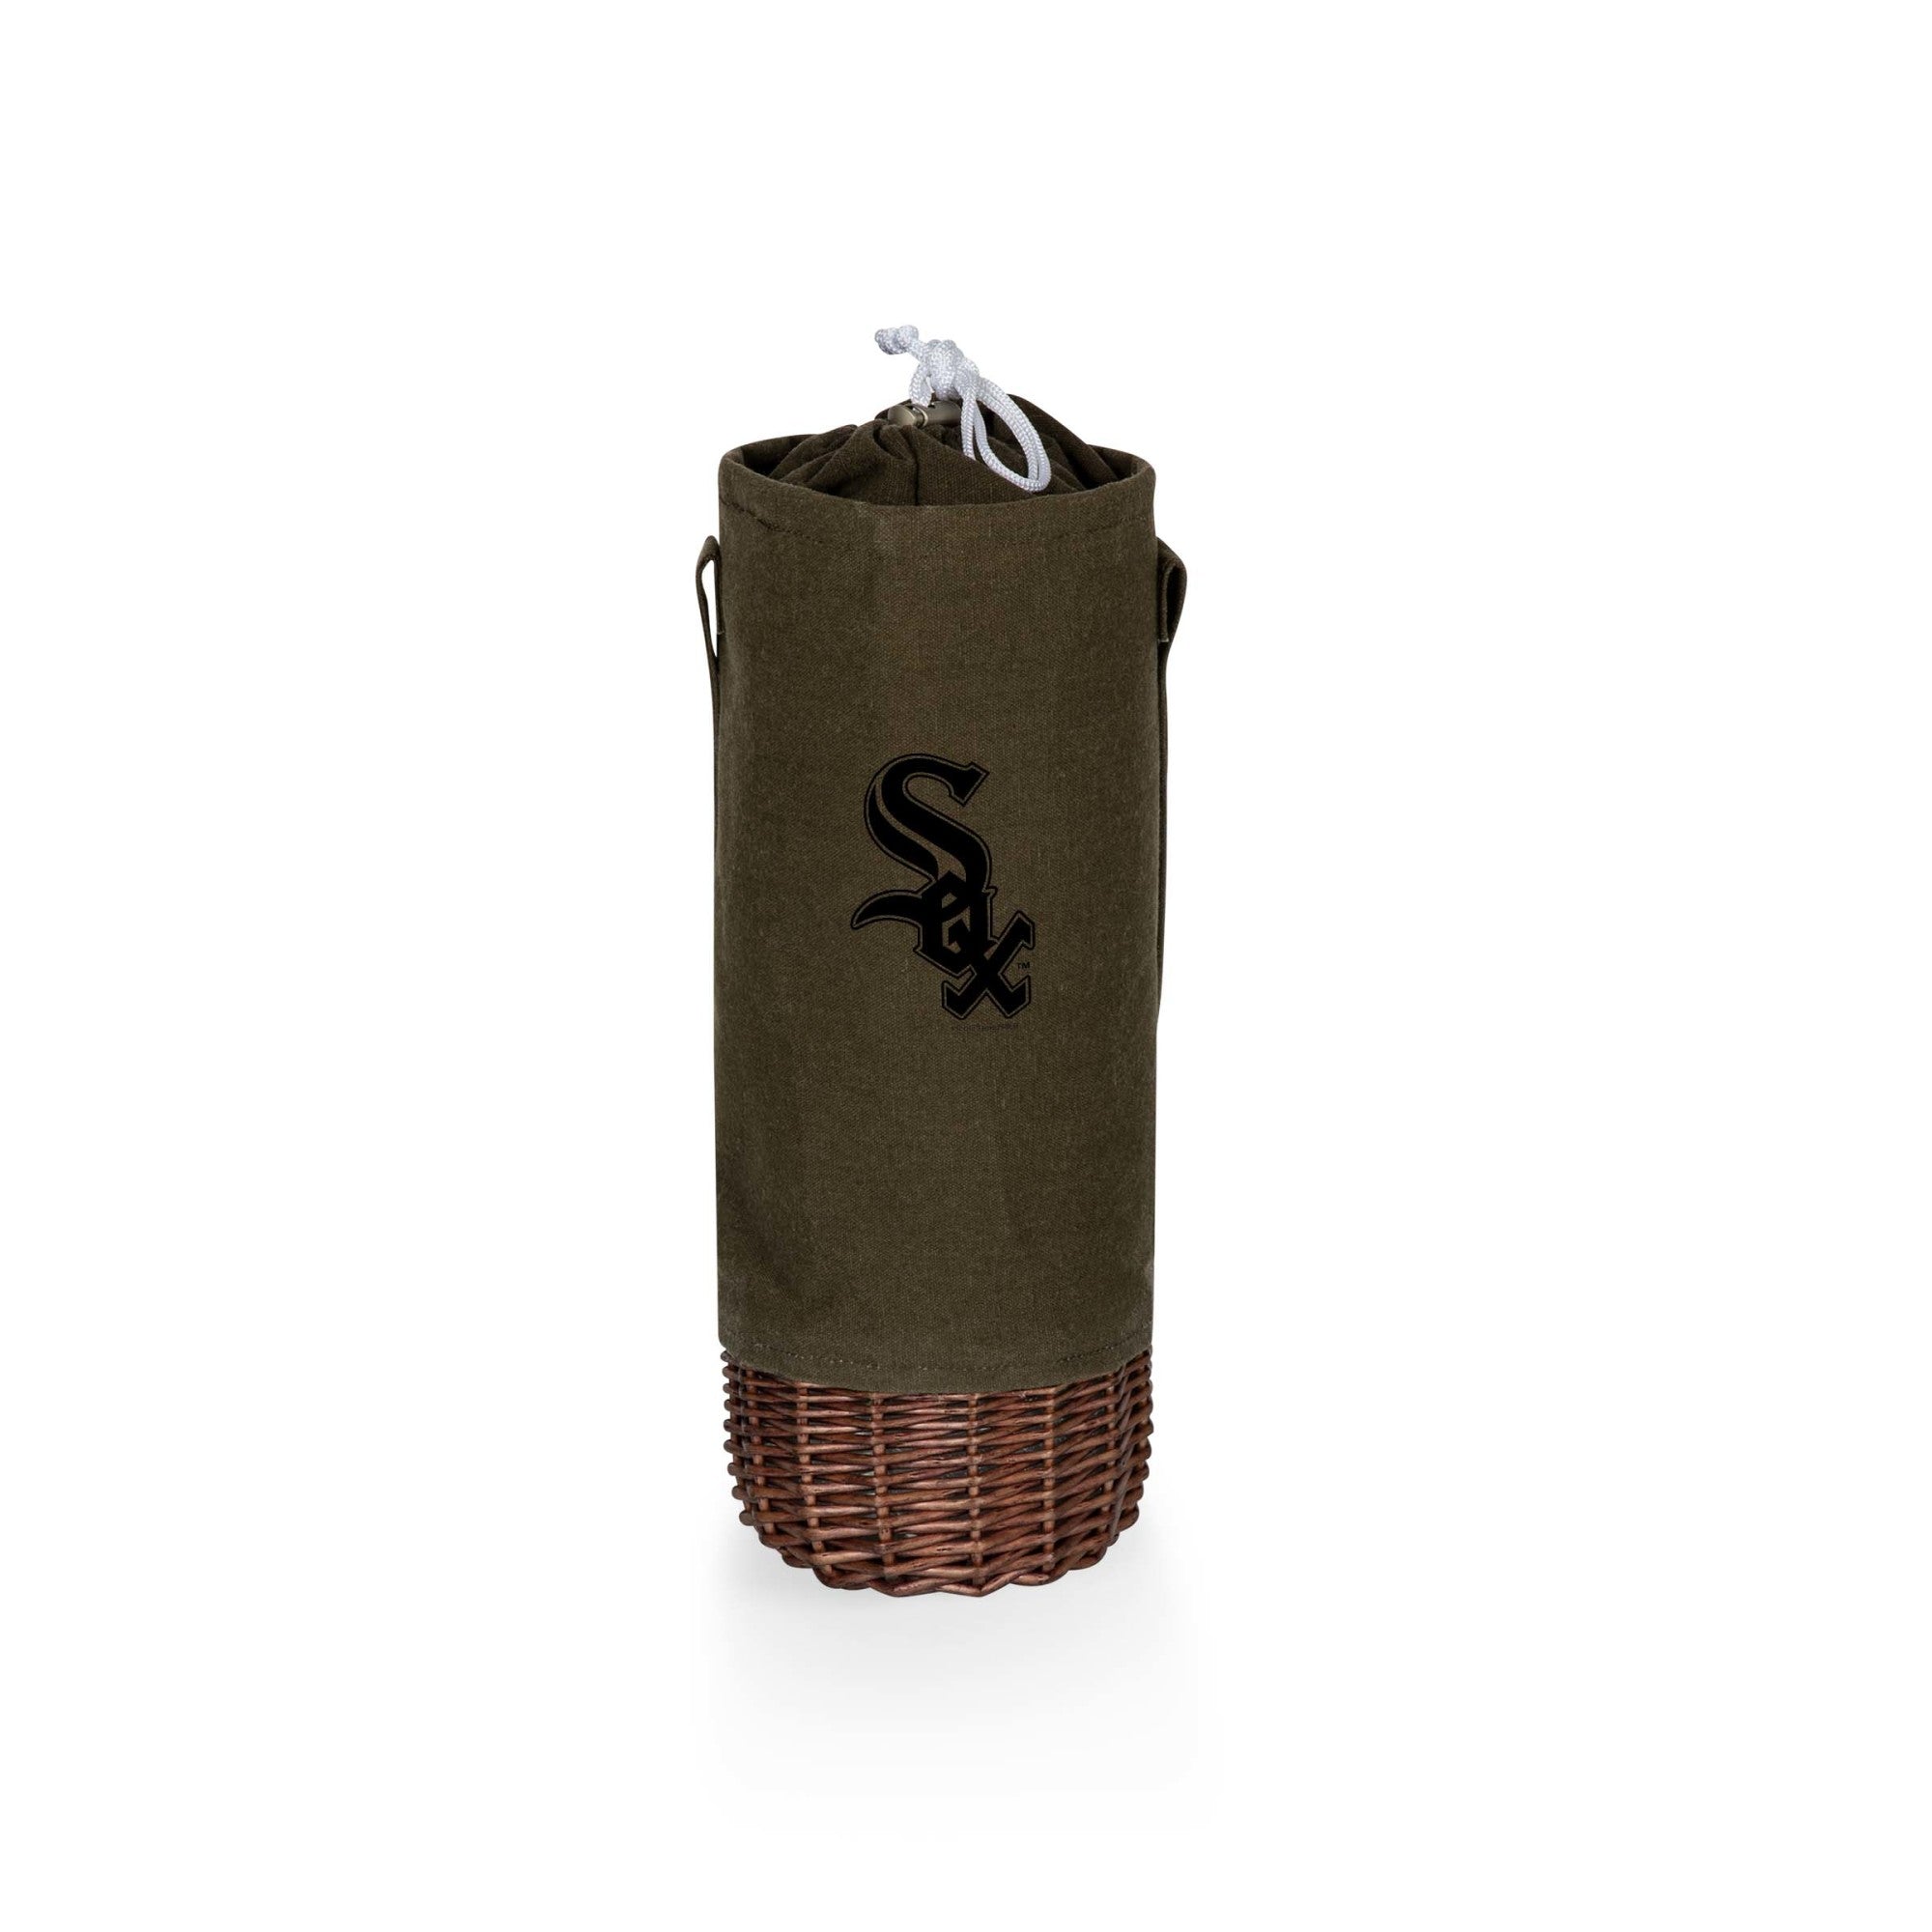 Chicago White Sox - Malbec Insulated Canvas and Willow Wine Bottle Basket